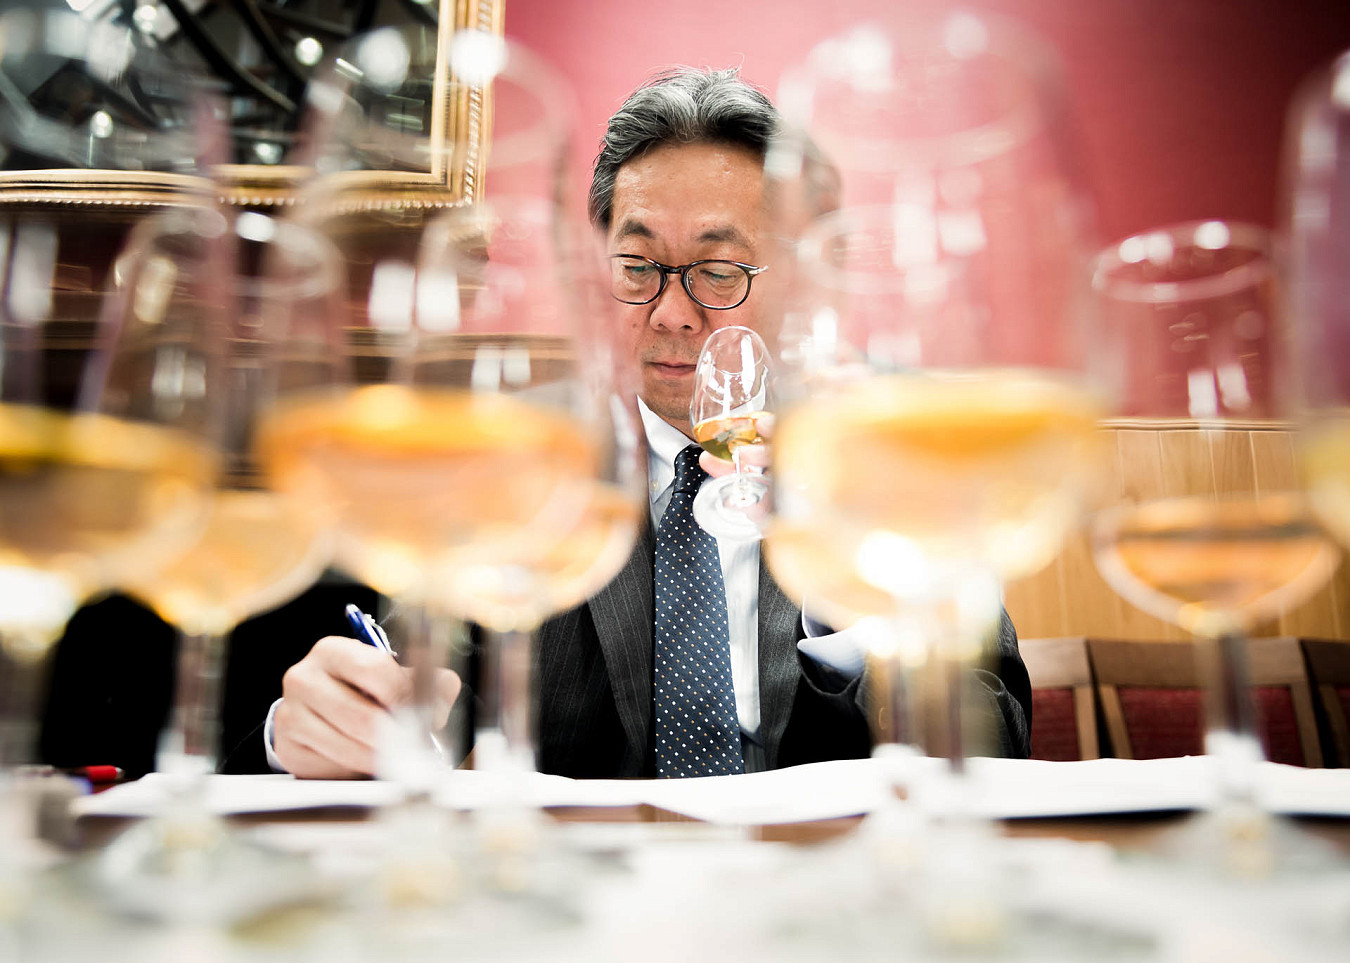 A man takes notes while holding and sampling a whisky at a judging event